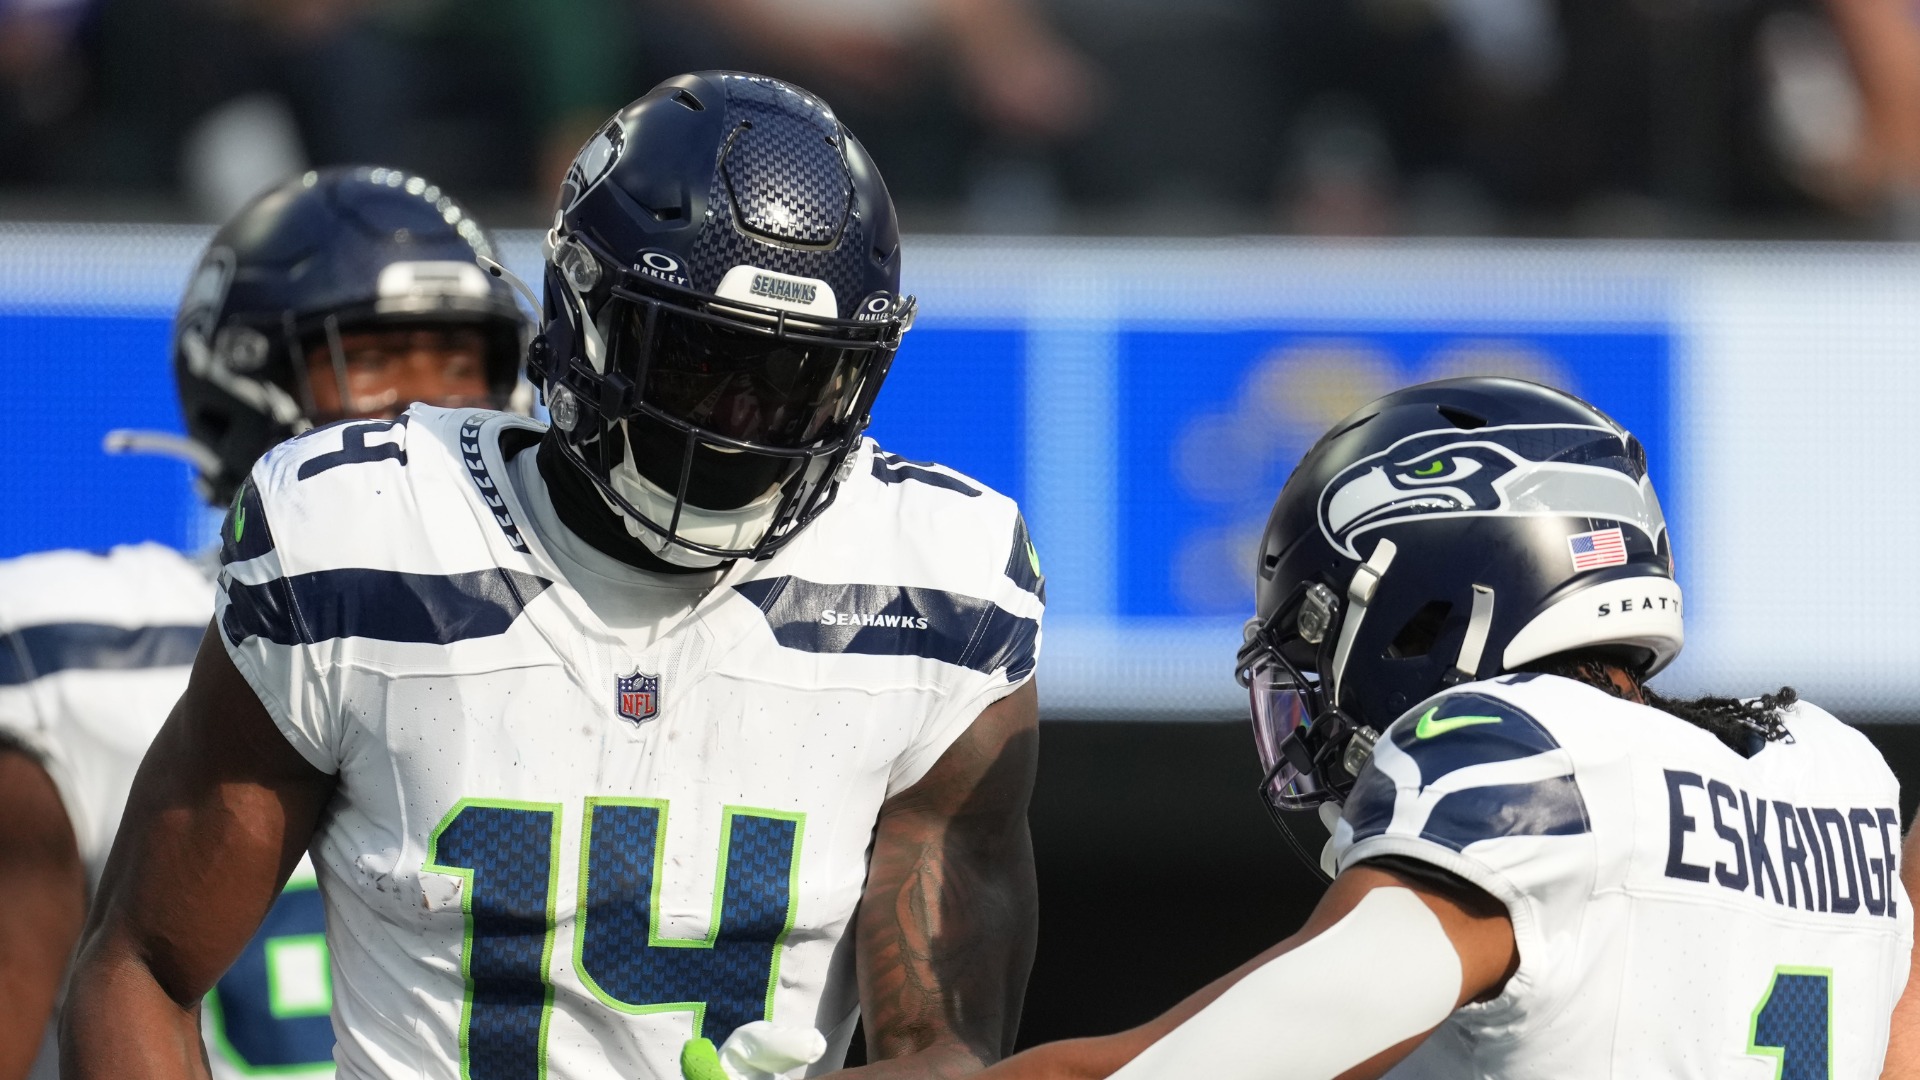 Seahawks Wide Receiver Learns Sign Language To Trash Talk Without Penalty